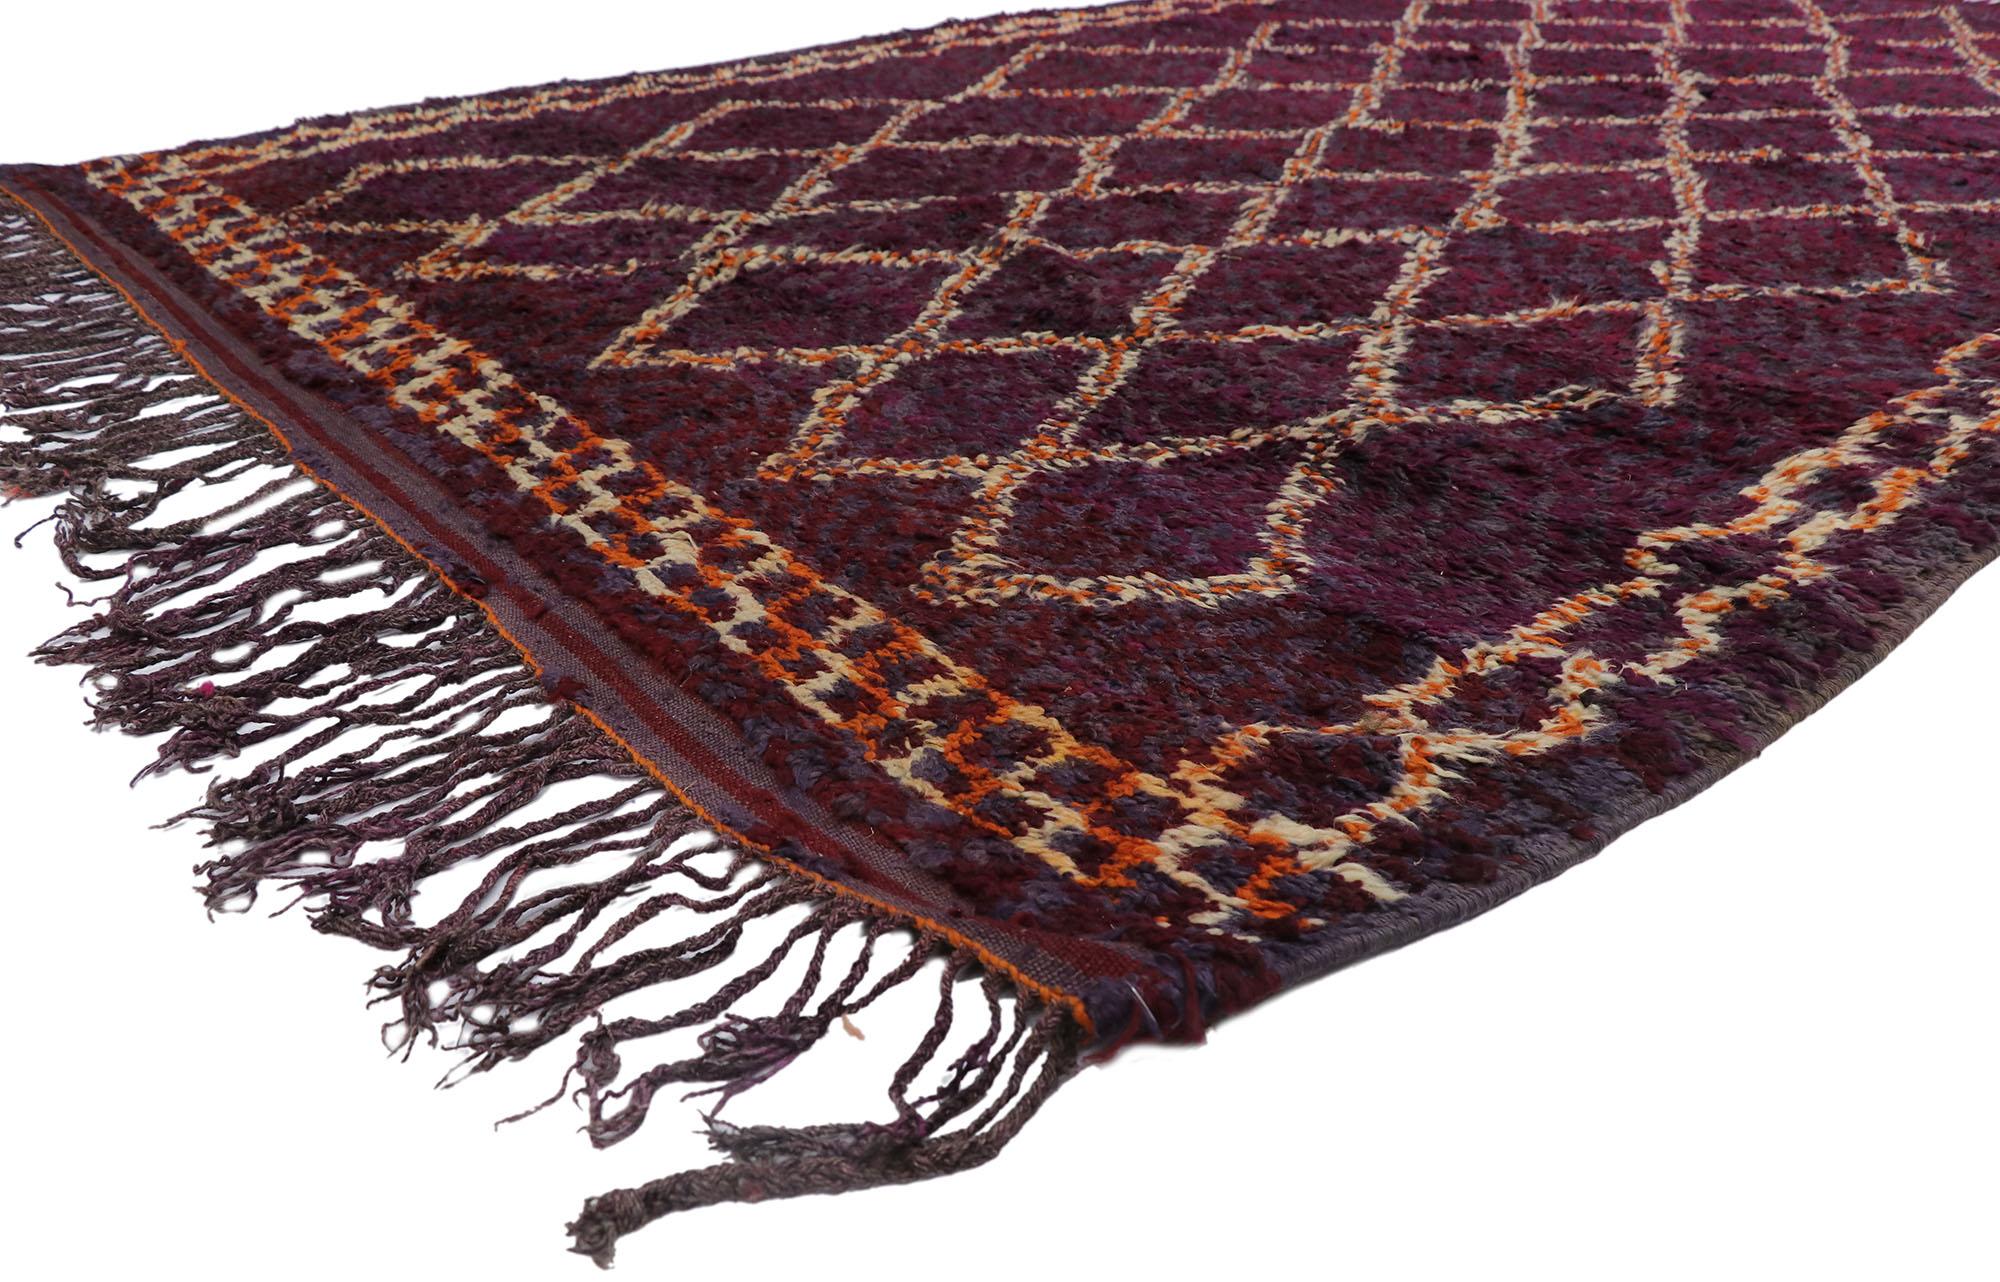 21515 Vintage Berber Beni M'Guild Moroccan Rug with Bohemian Style 07'00 x 11'03. Showcasing an expressive tribal design, incredible detail and texture, this hand knotted wool vintage Berber Beni M'Guild Moroccan rug is a captivating vision of woven